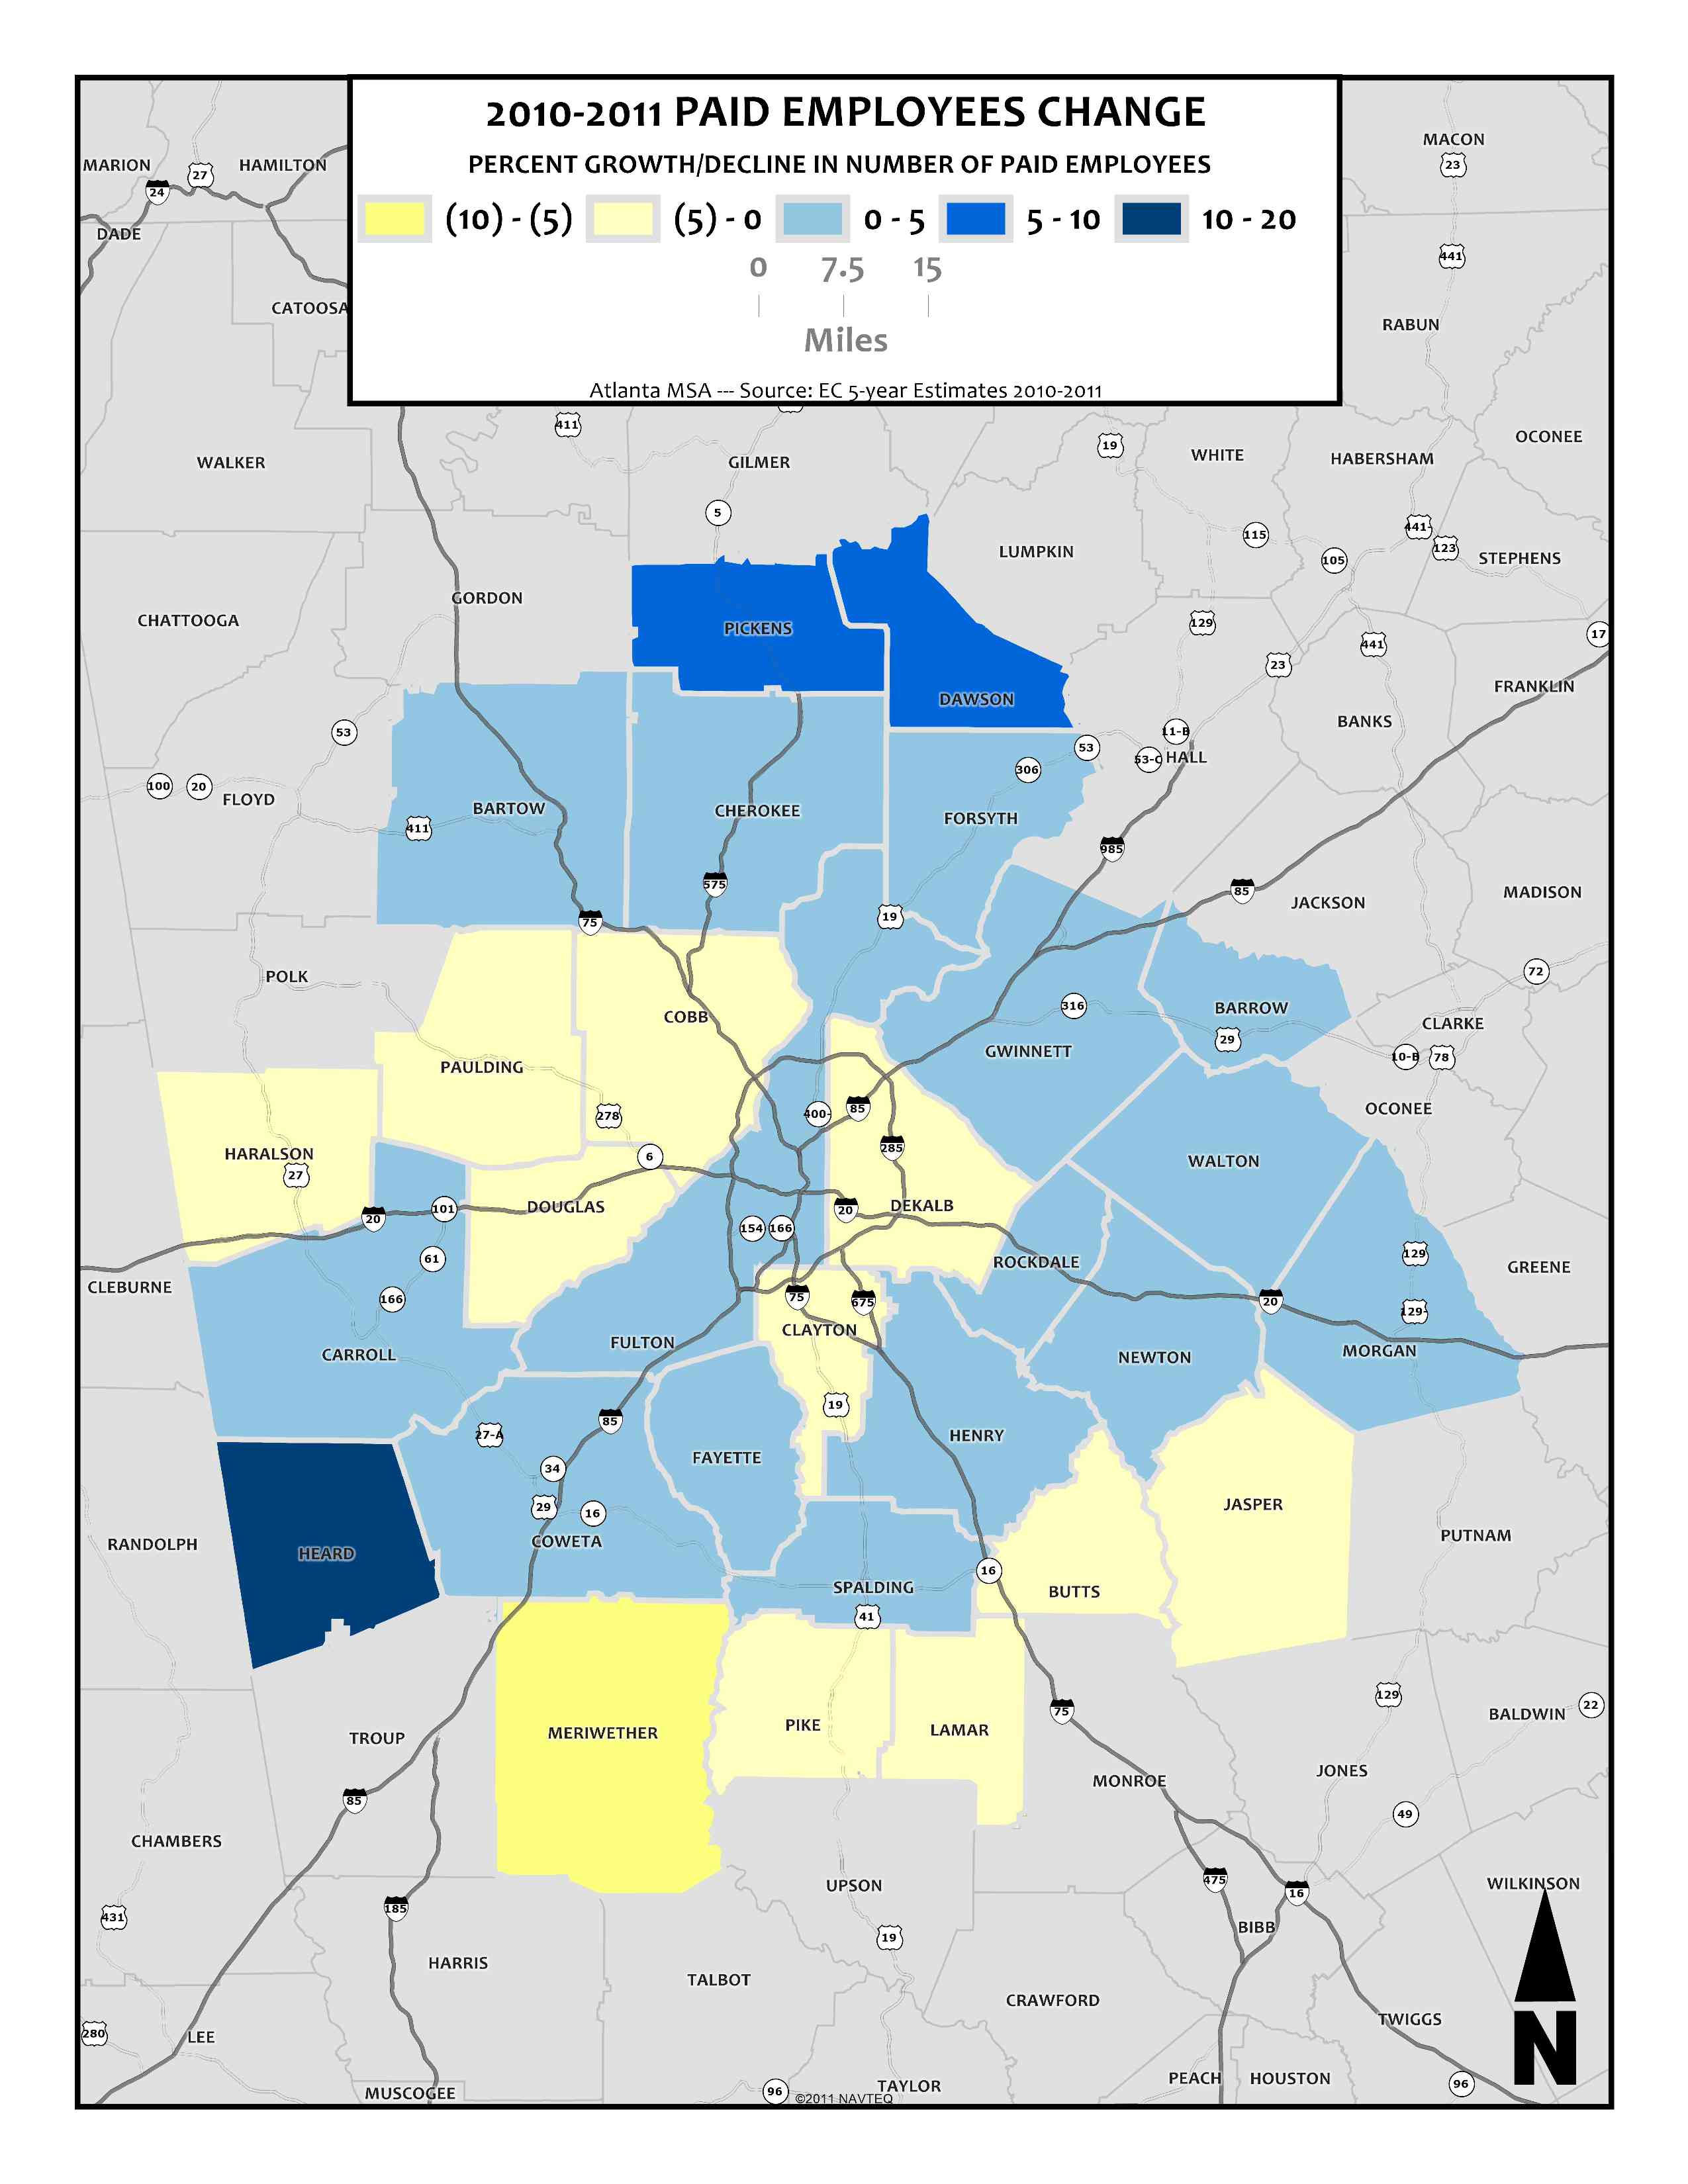 Paid Employees Change Percent, 2010-2011 – metro counties